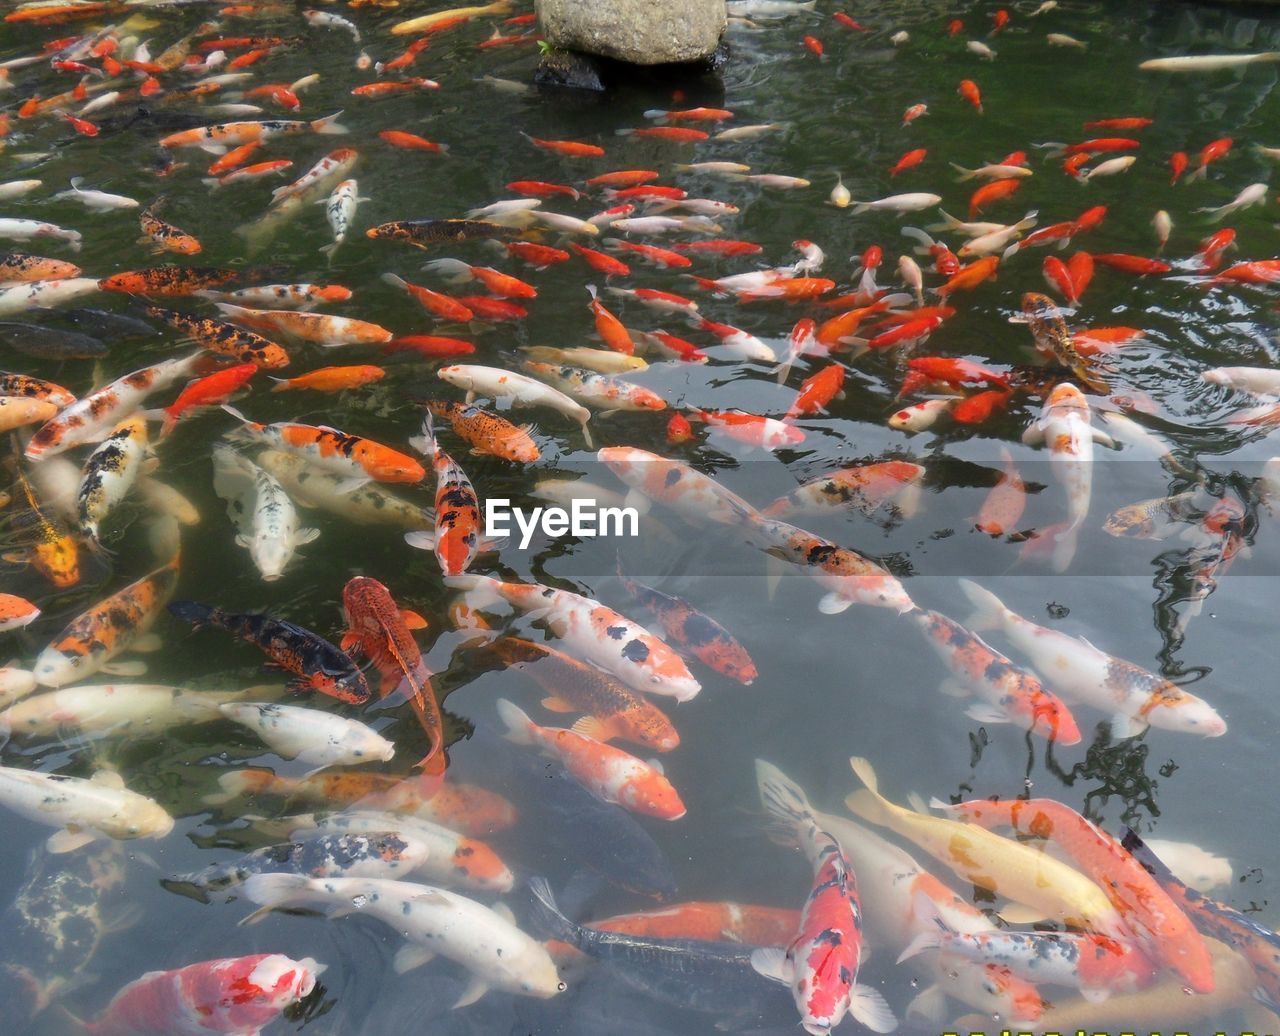 High angle view of fishes swimming in pond